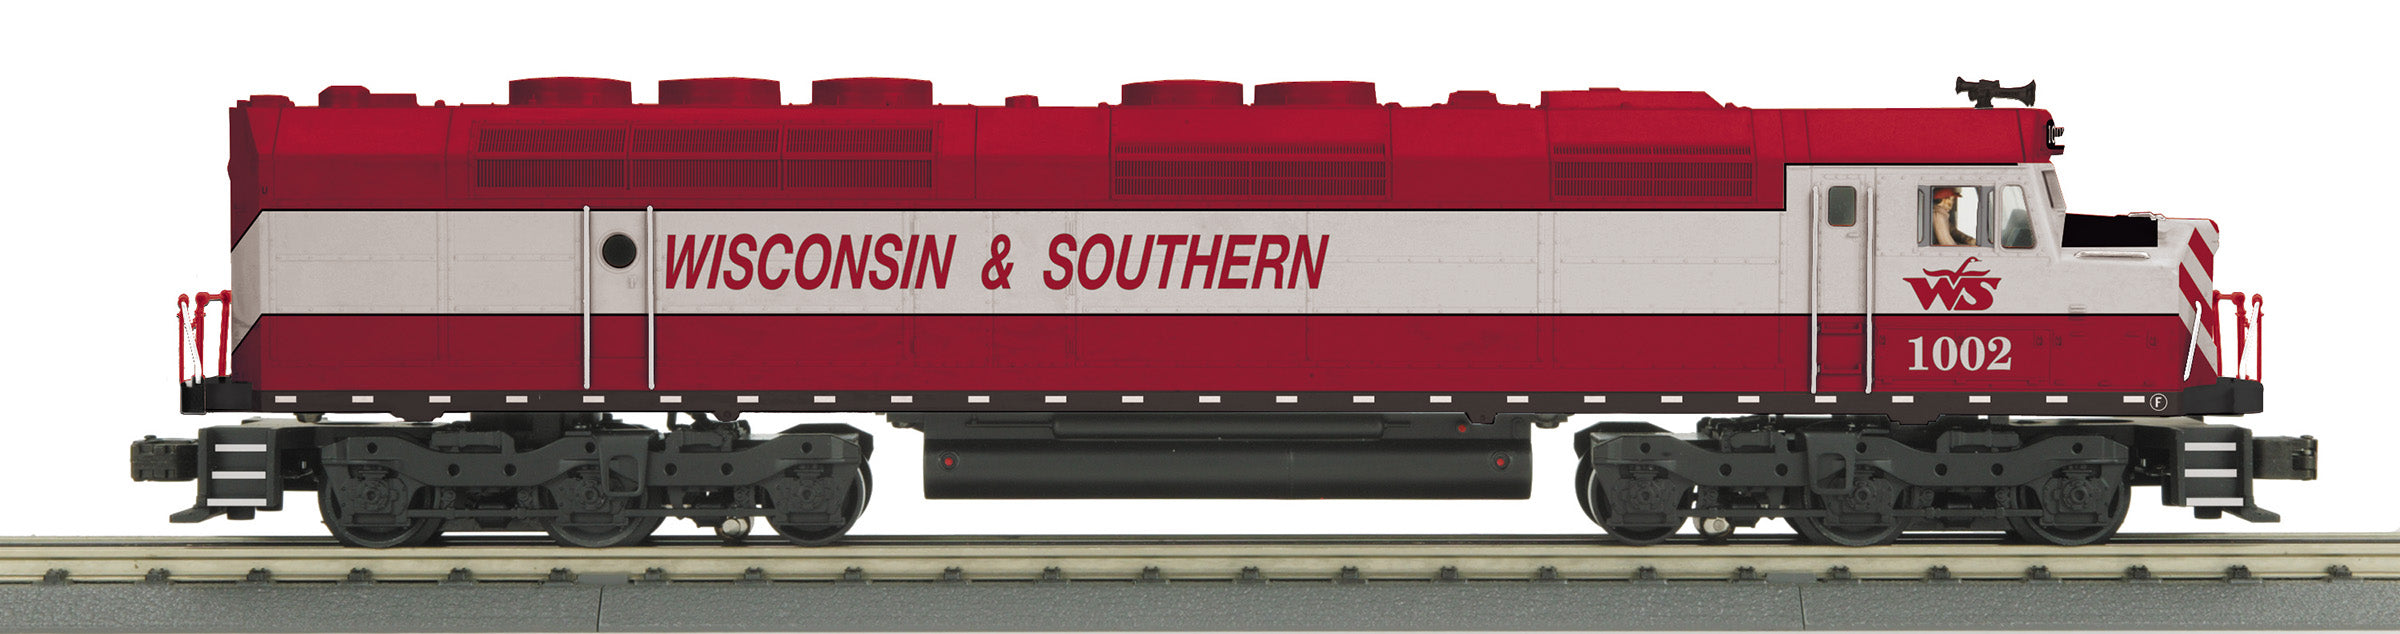 MTH 30-21220-1 - FP45 Diesel Locomotive "Wisconsin & Southern" #1002 w/ PS3